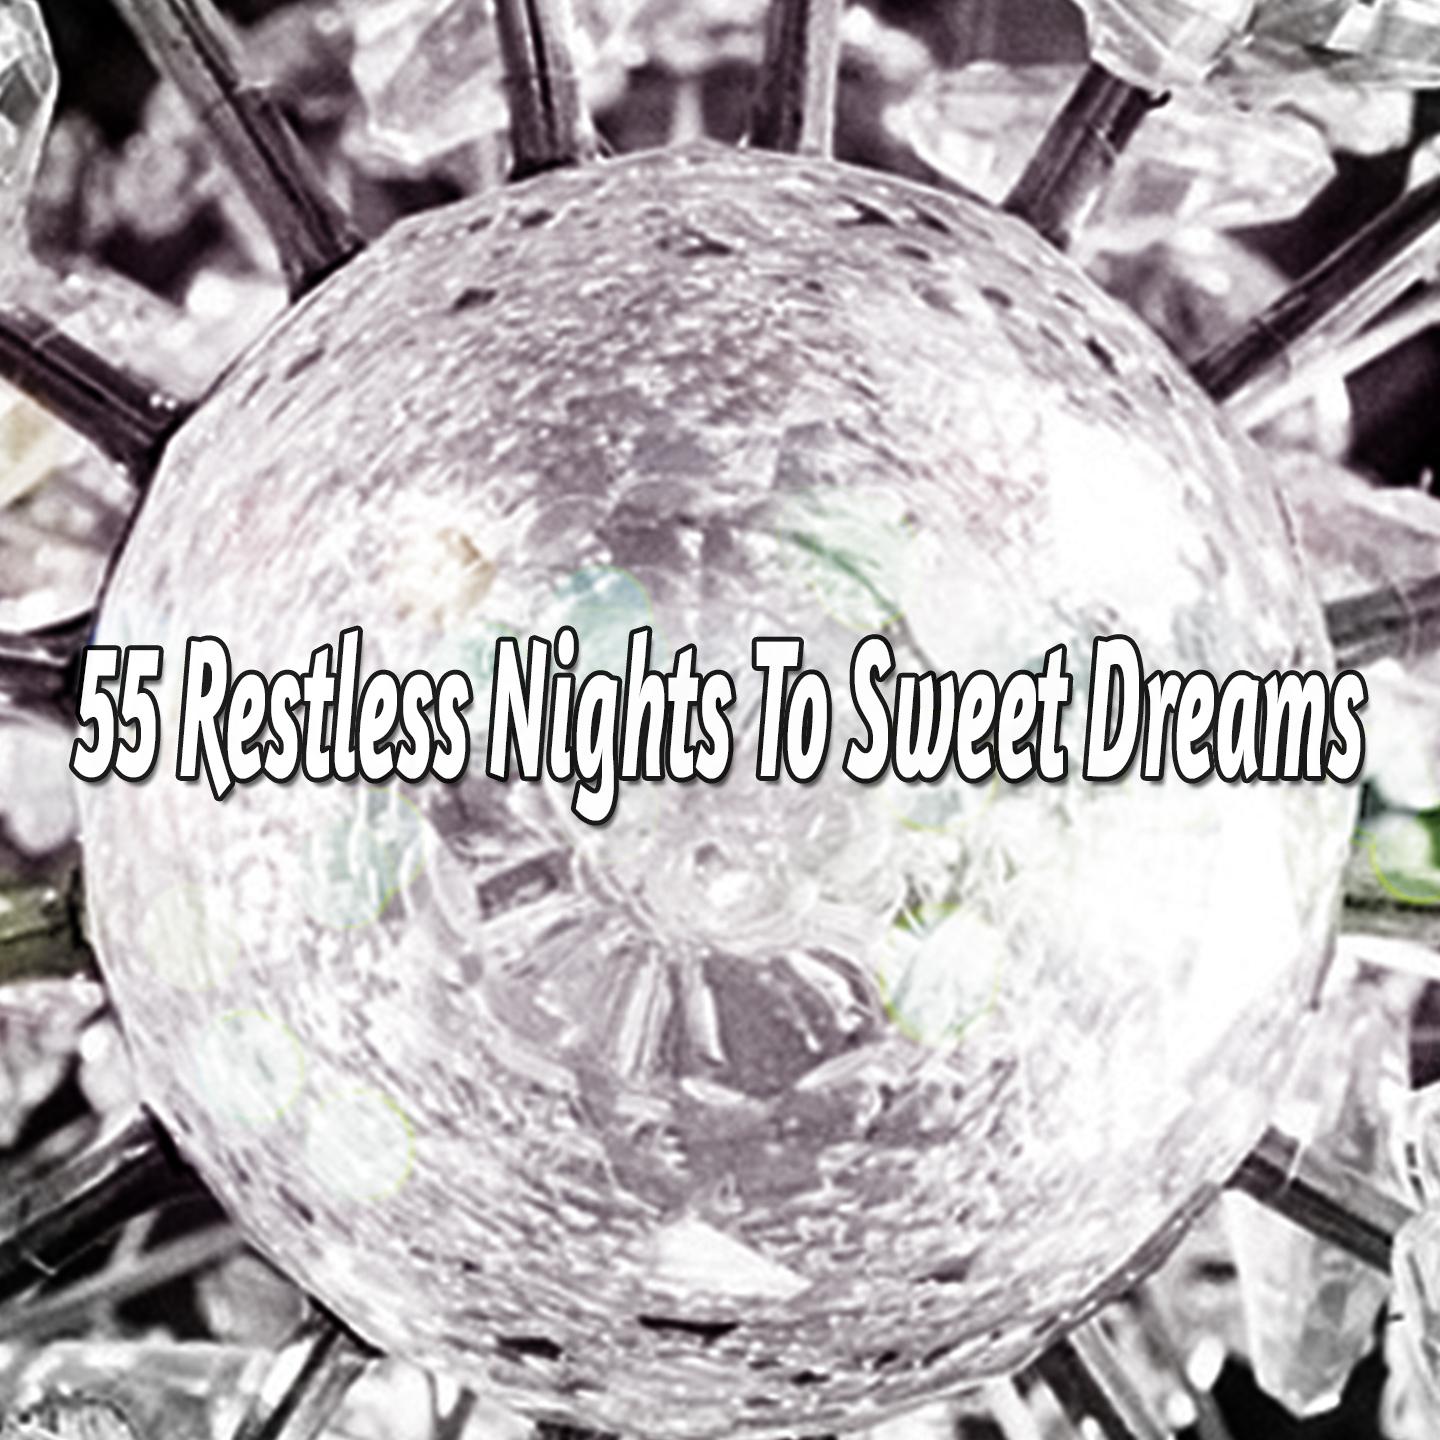 55 Restless Nights To Sweet Dreams